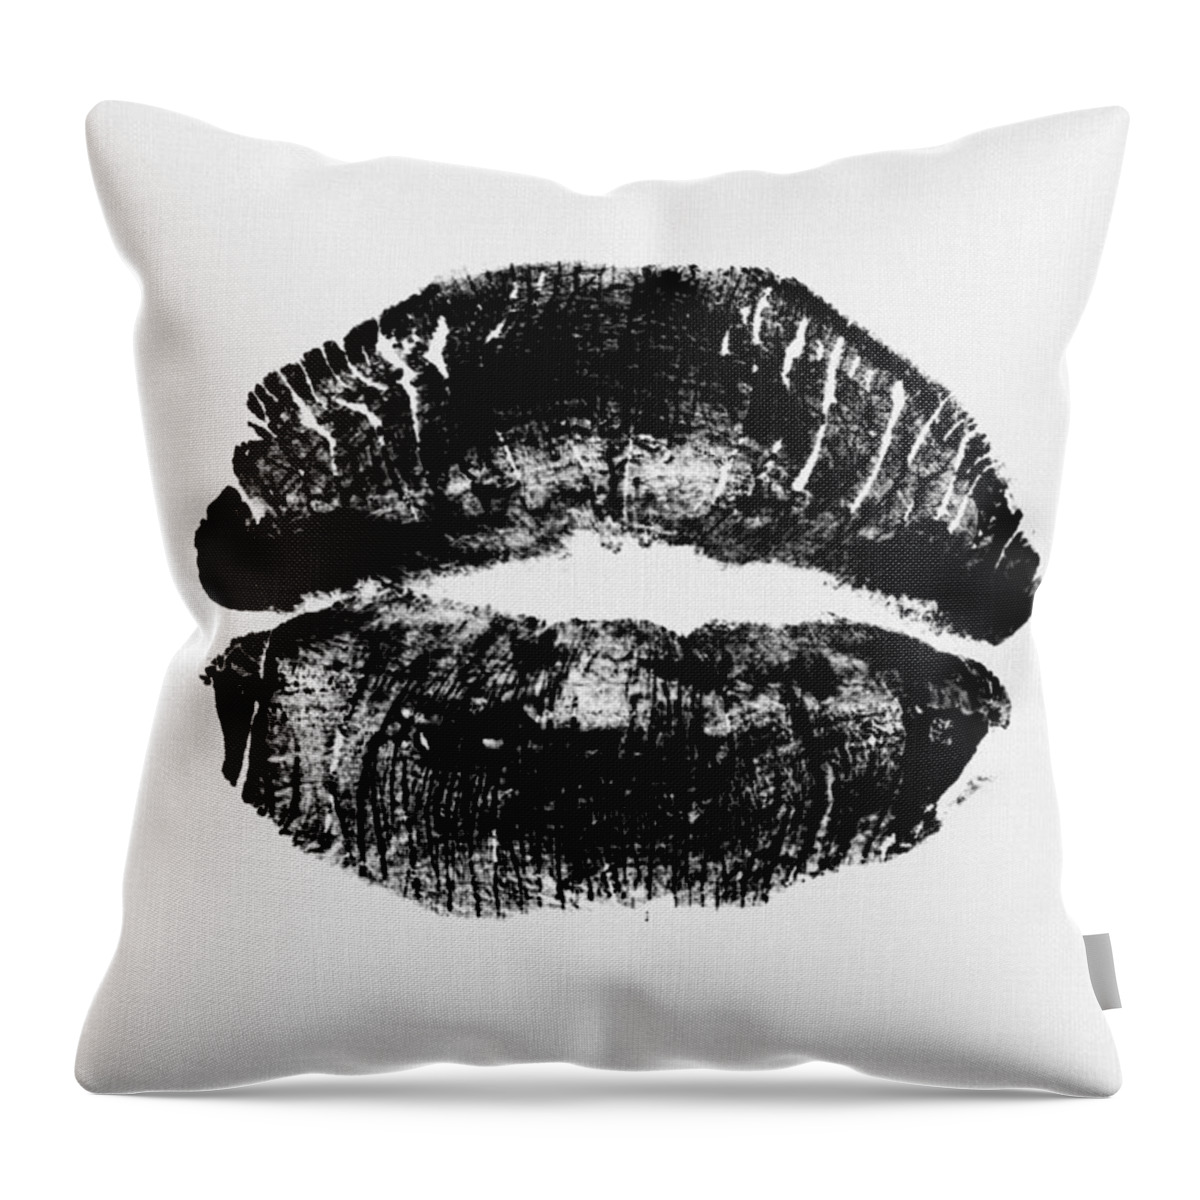 Black And White Throw Pillow featuring the mixed media Black Lips Print by Naxart Studio